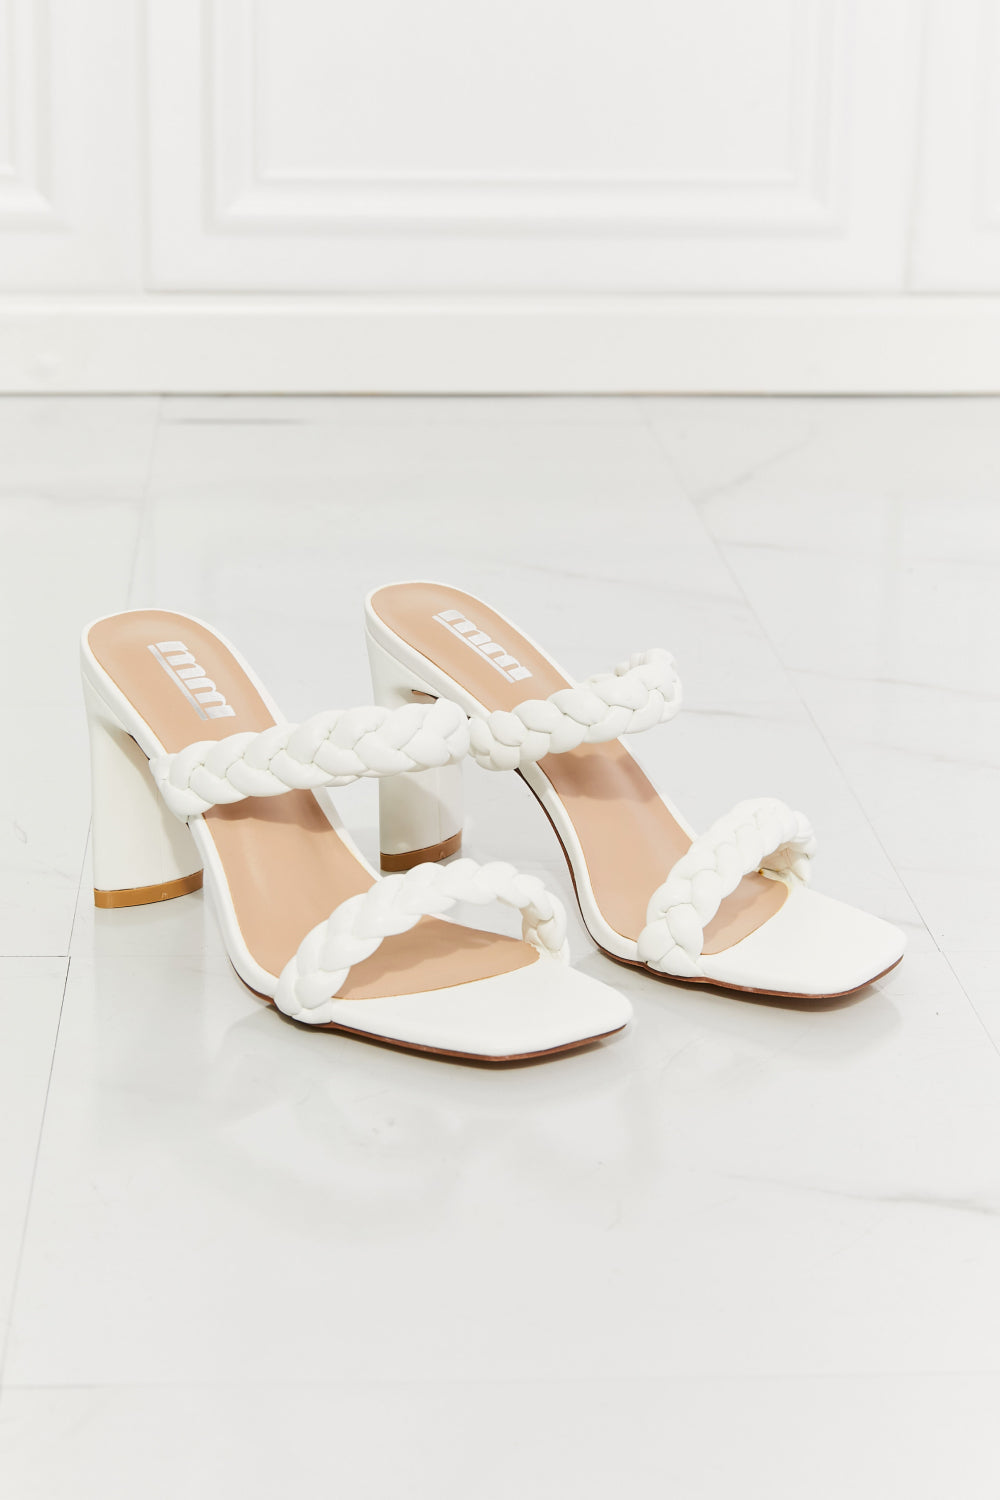 MMShoes In Love Double Braided Block Heel Sandal in White - Tigbul's Fashion